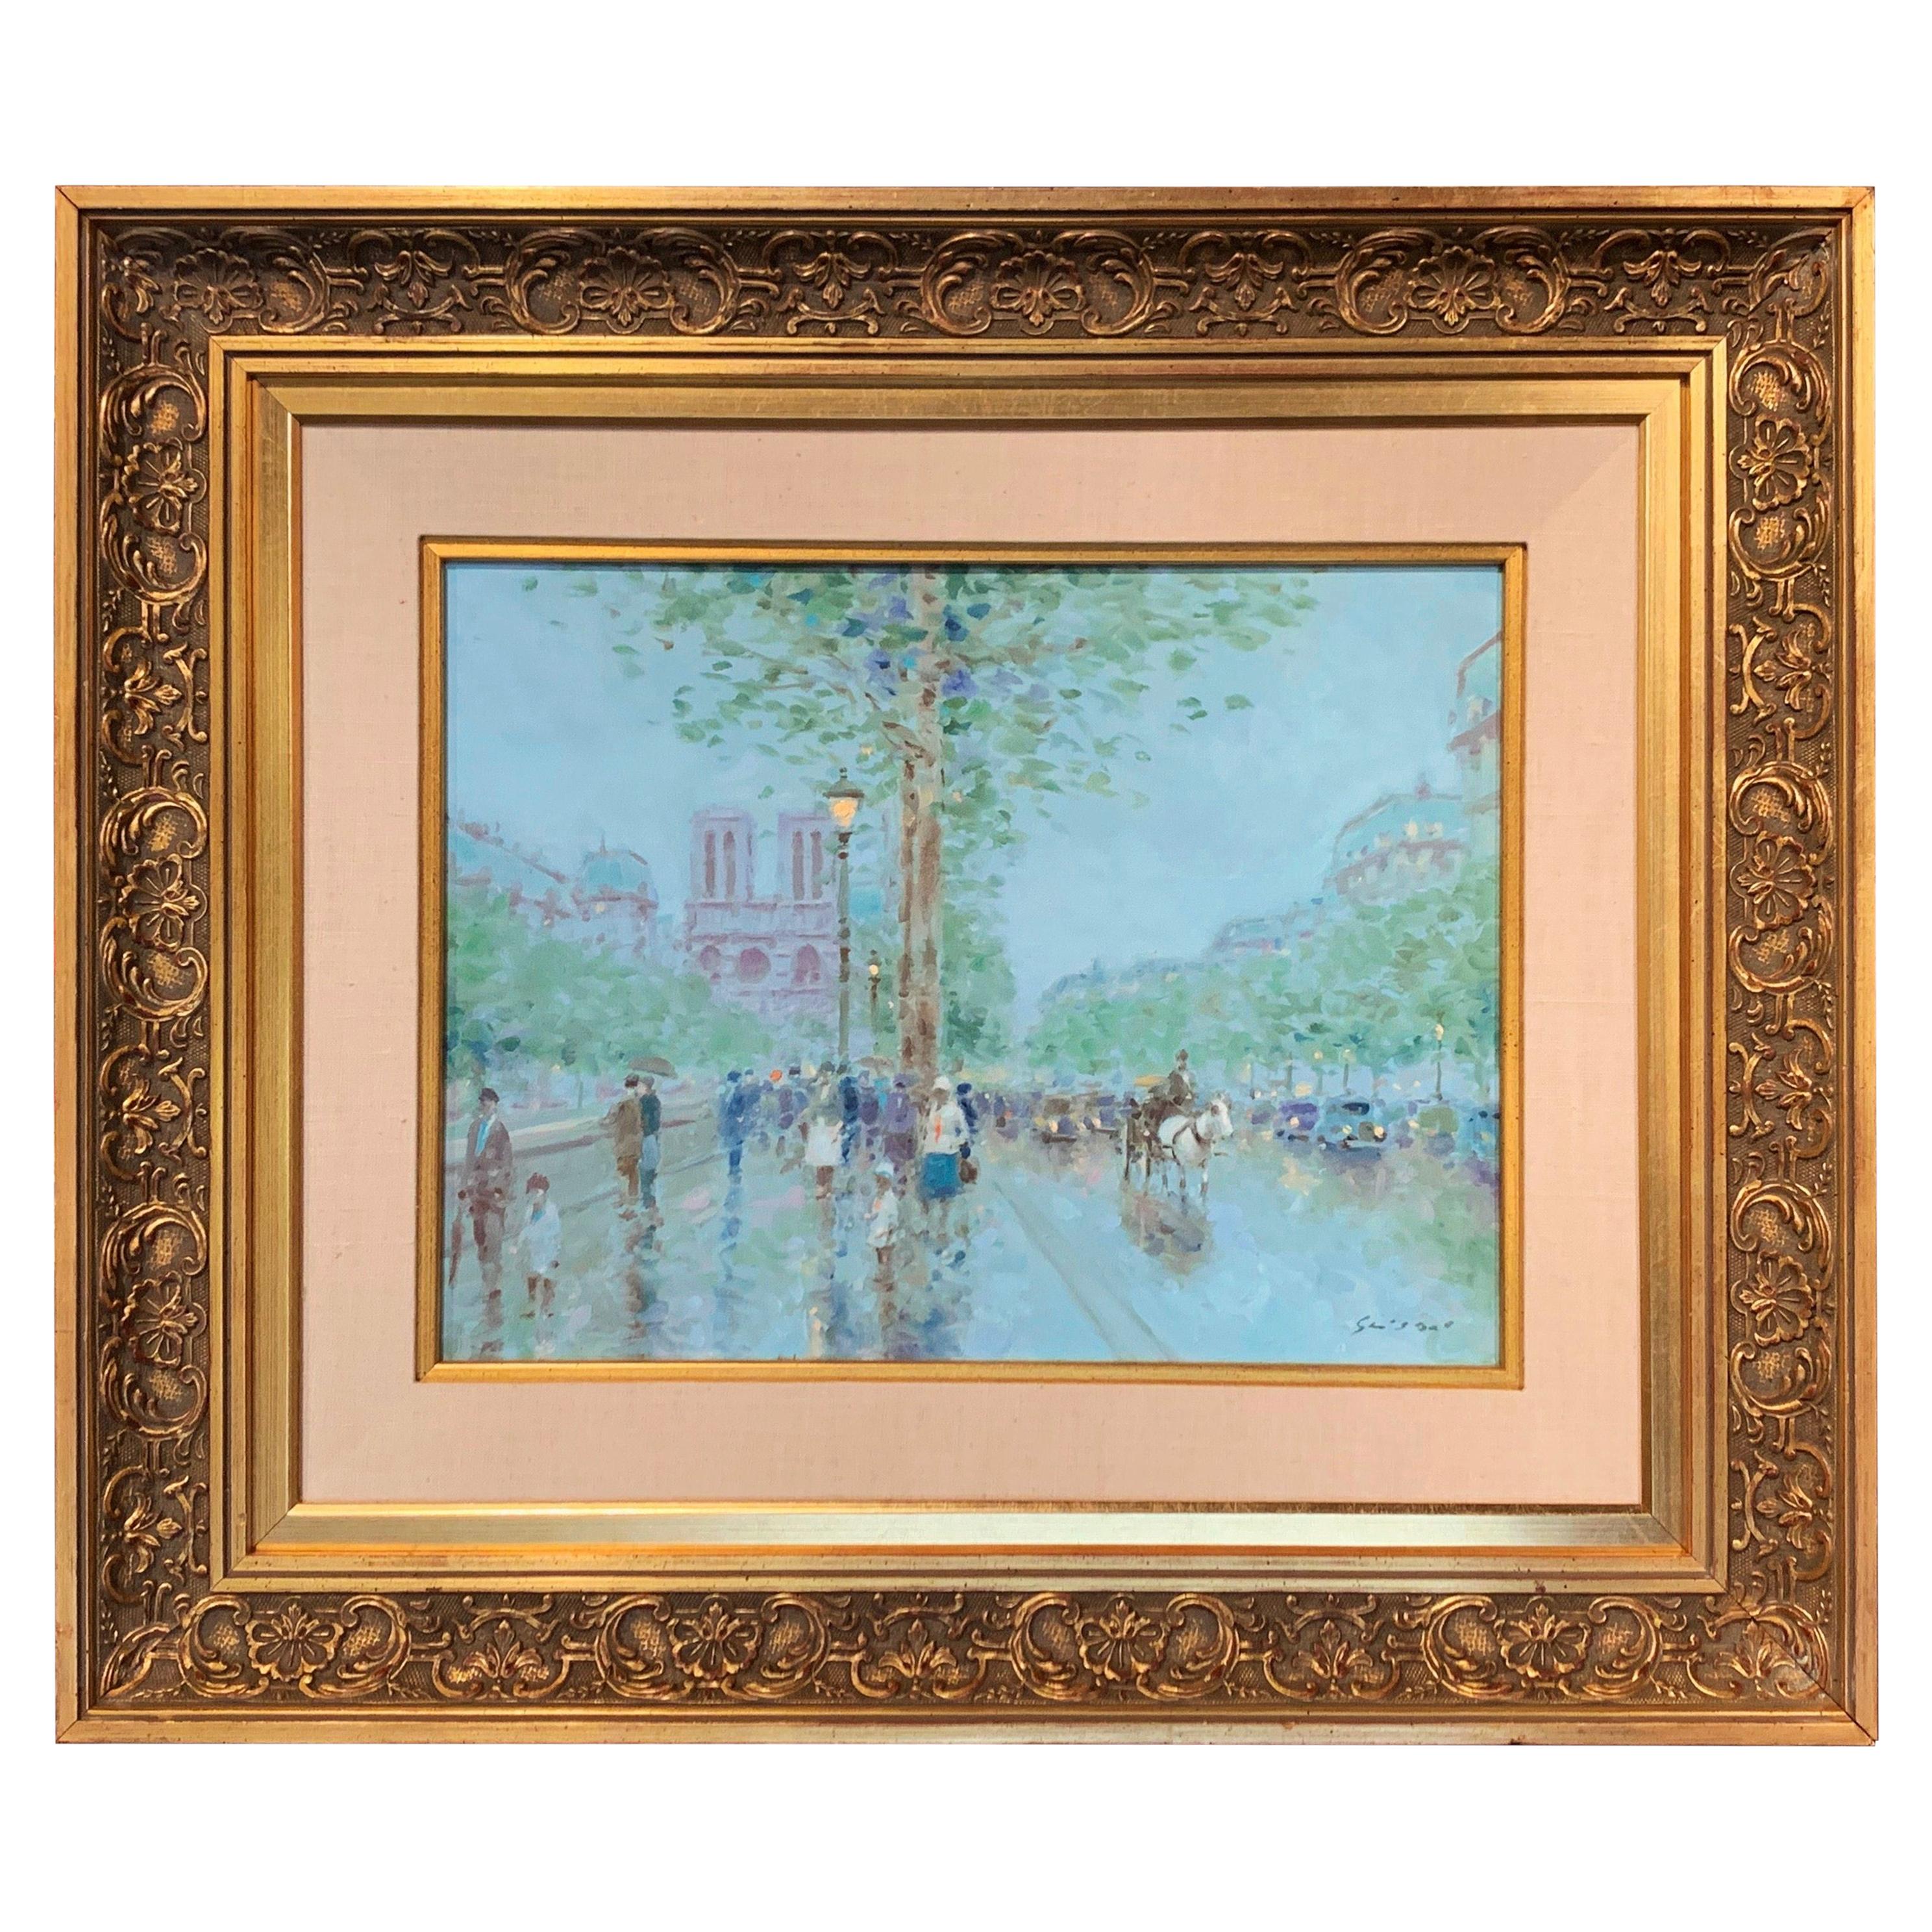 Notre-Dame de Paris Oil on Canvas Painting in Carved Gilt Frame Signed Gisson